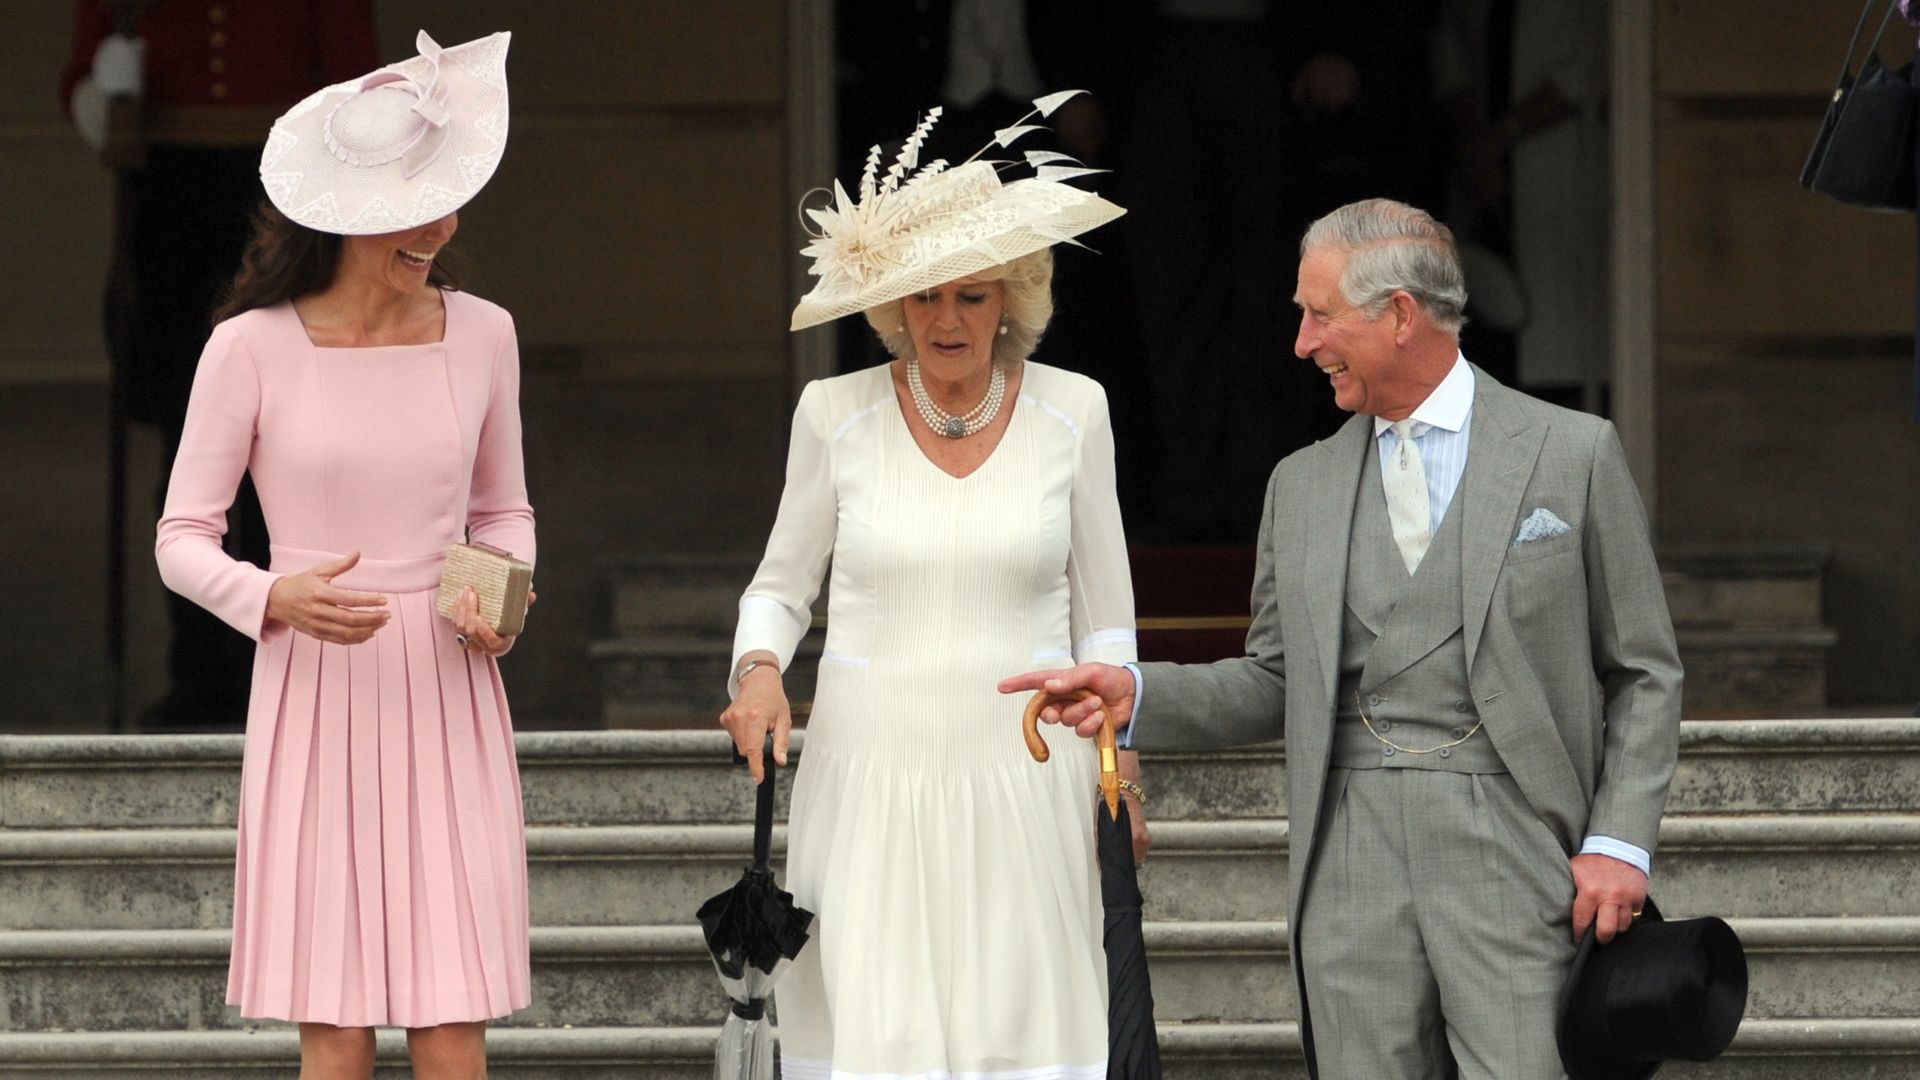 Kate Middleton giggles with Charles and Camilla at Buckingham Palace garden party